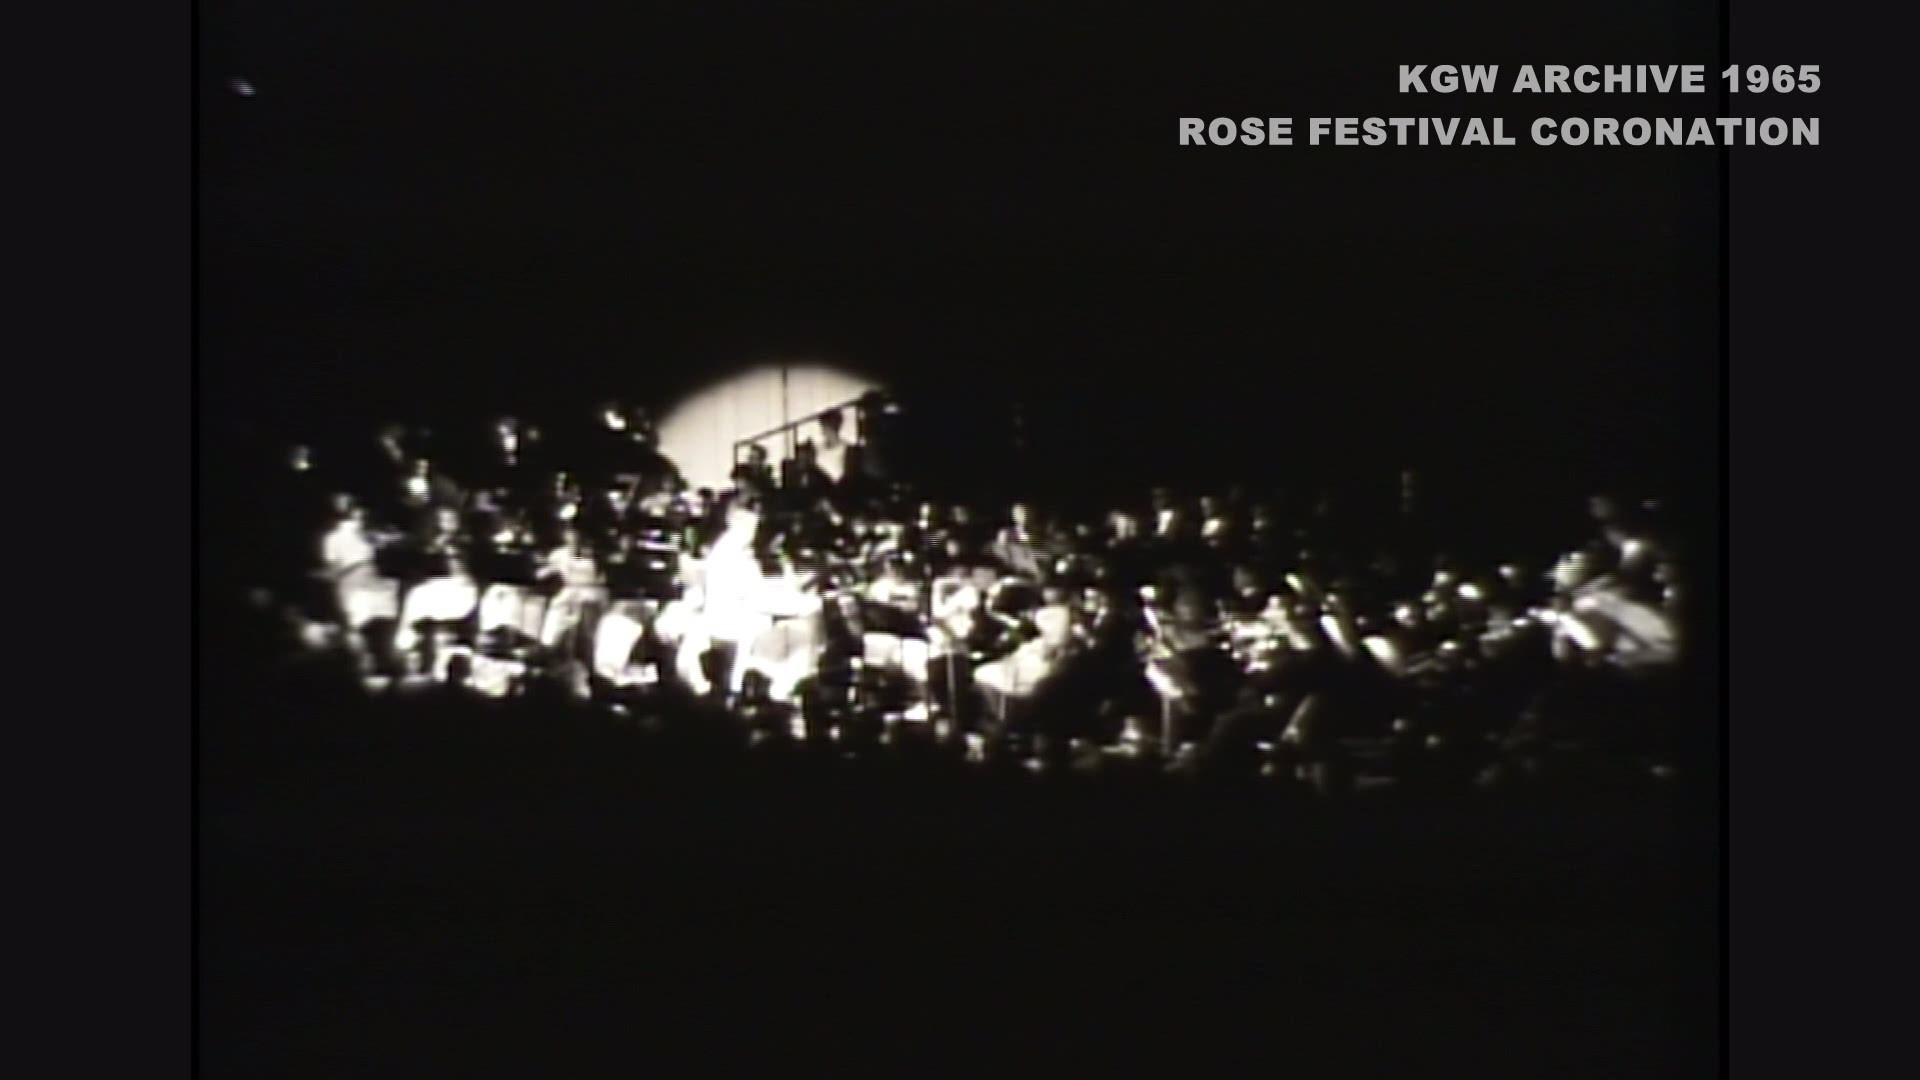 From the KGW archives: The 1965 Rose Festival coronation